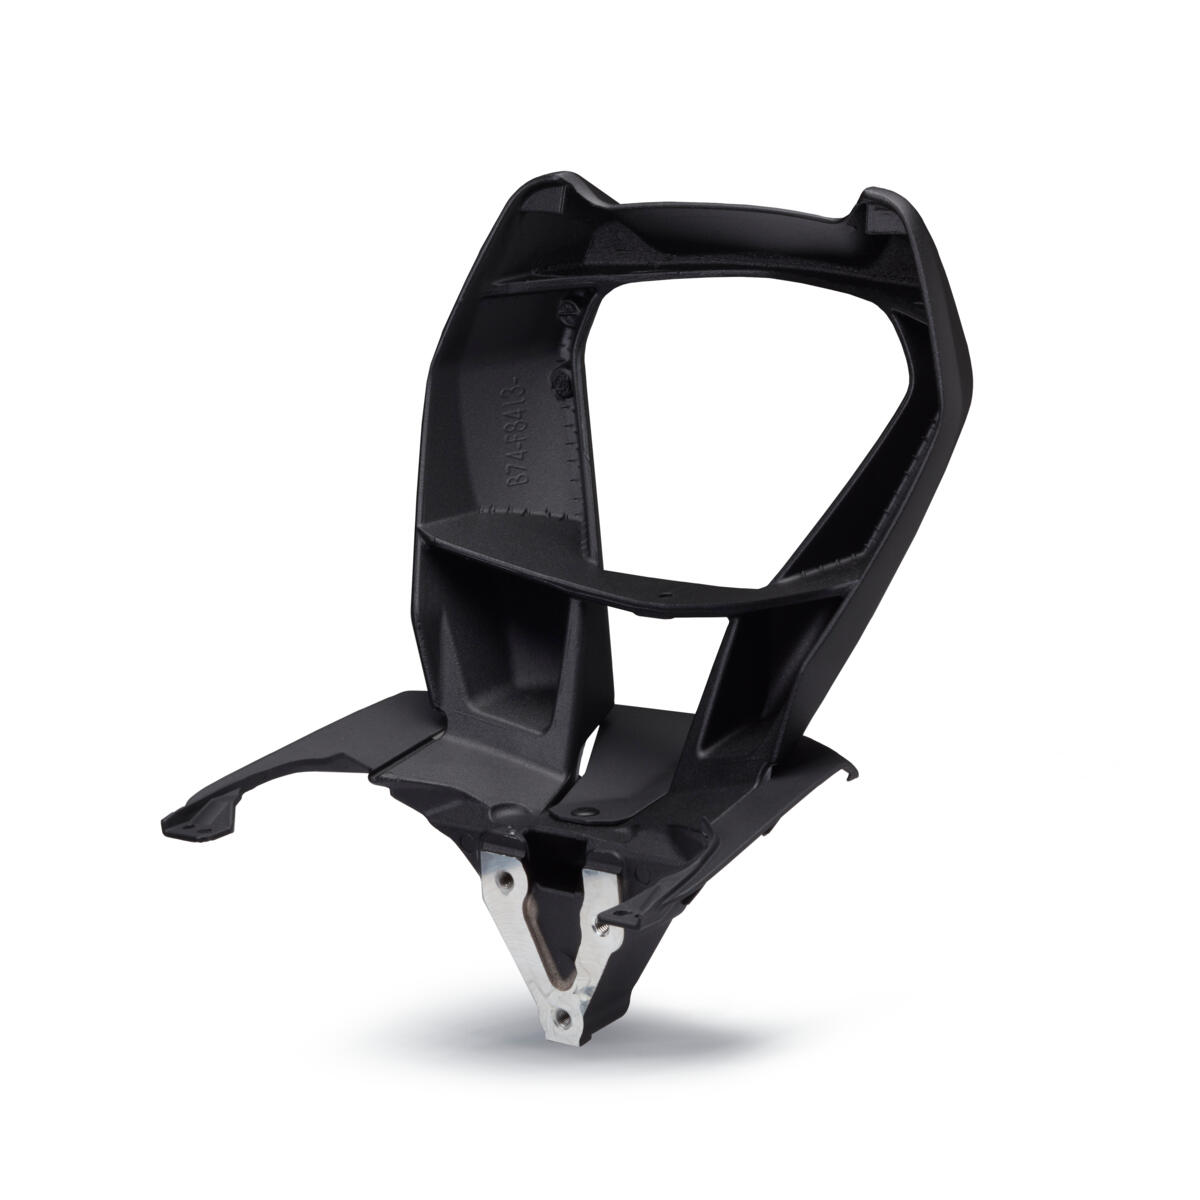 Base for back support for your passenger providing a comfortable ride.